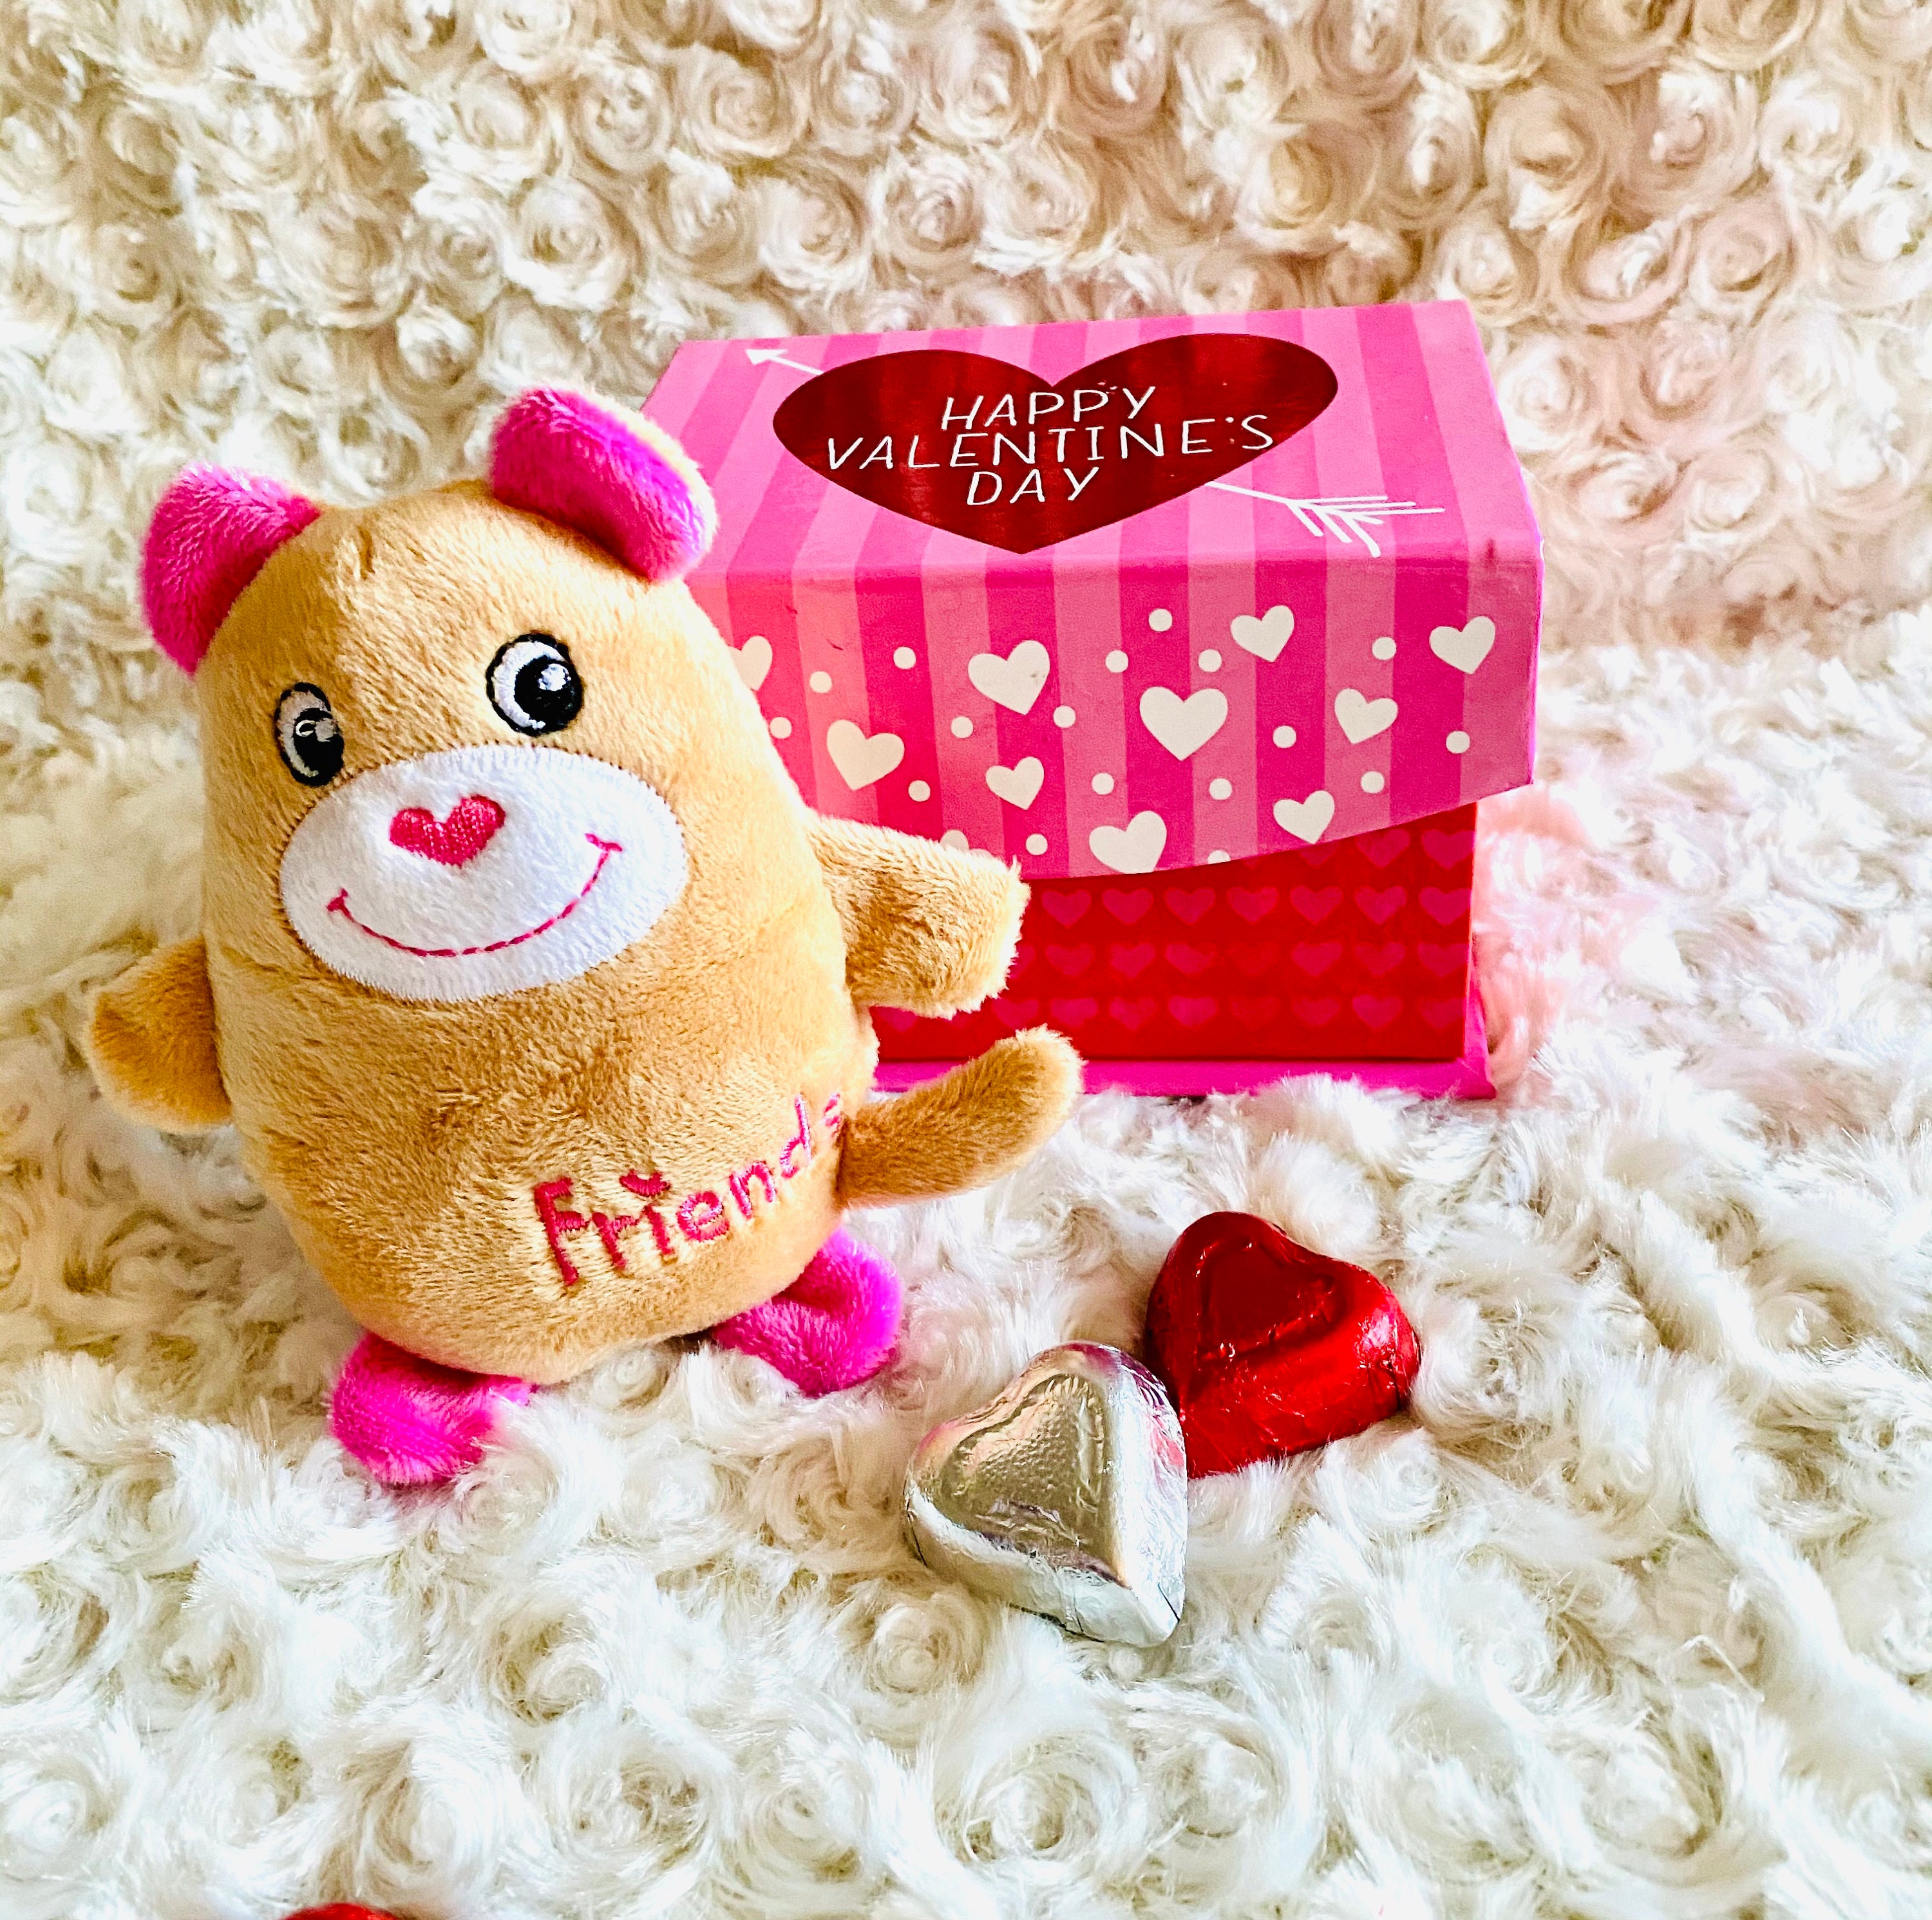 Handmade Cute Critters & Stuffies for Valentine's Day - Fairfield World Blog